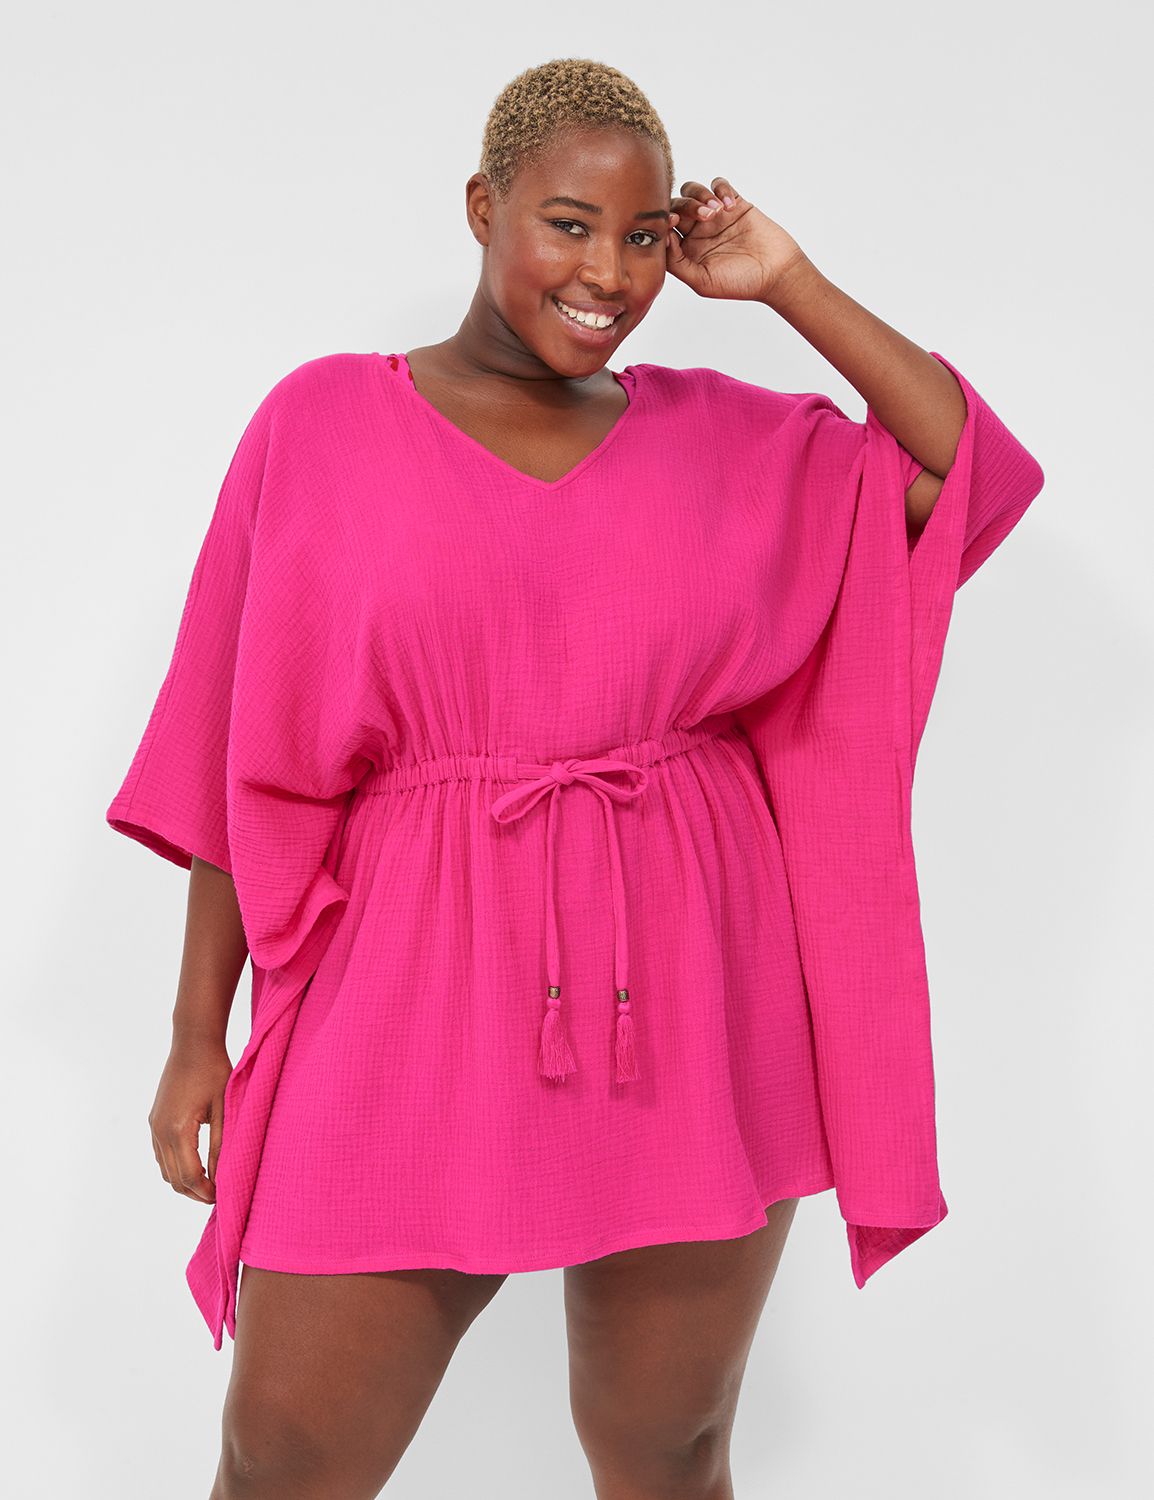 Plus Size Bathing Suit Cover Ups for Women New Fashion Beach Sexy